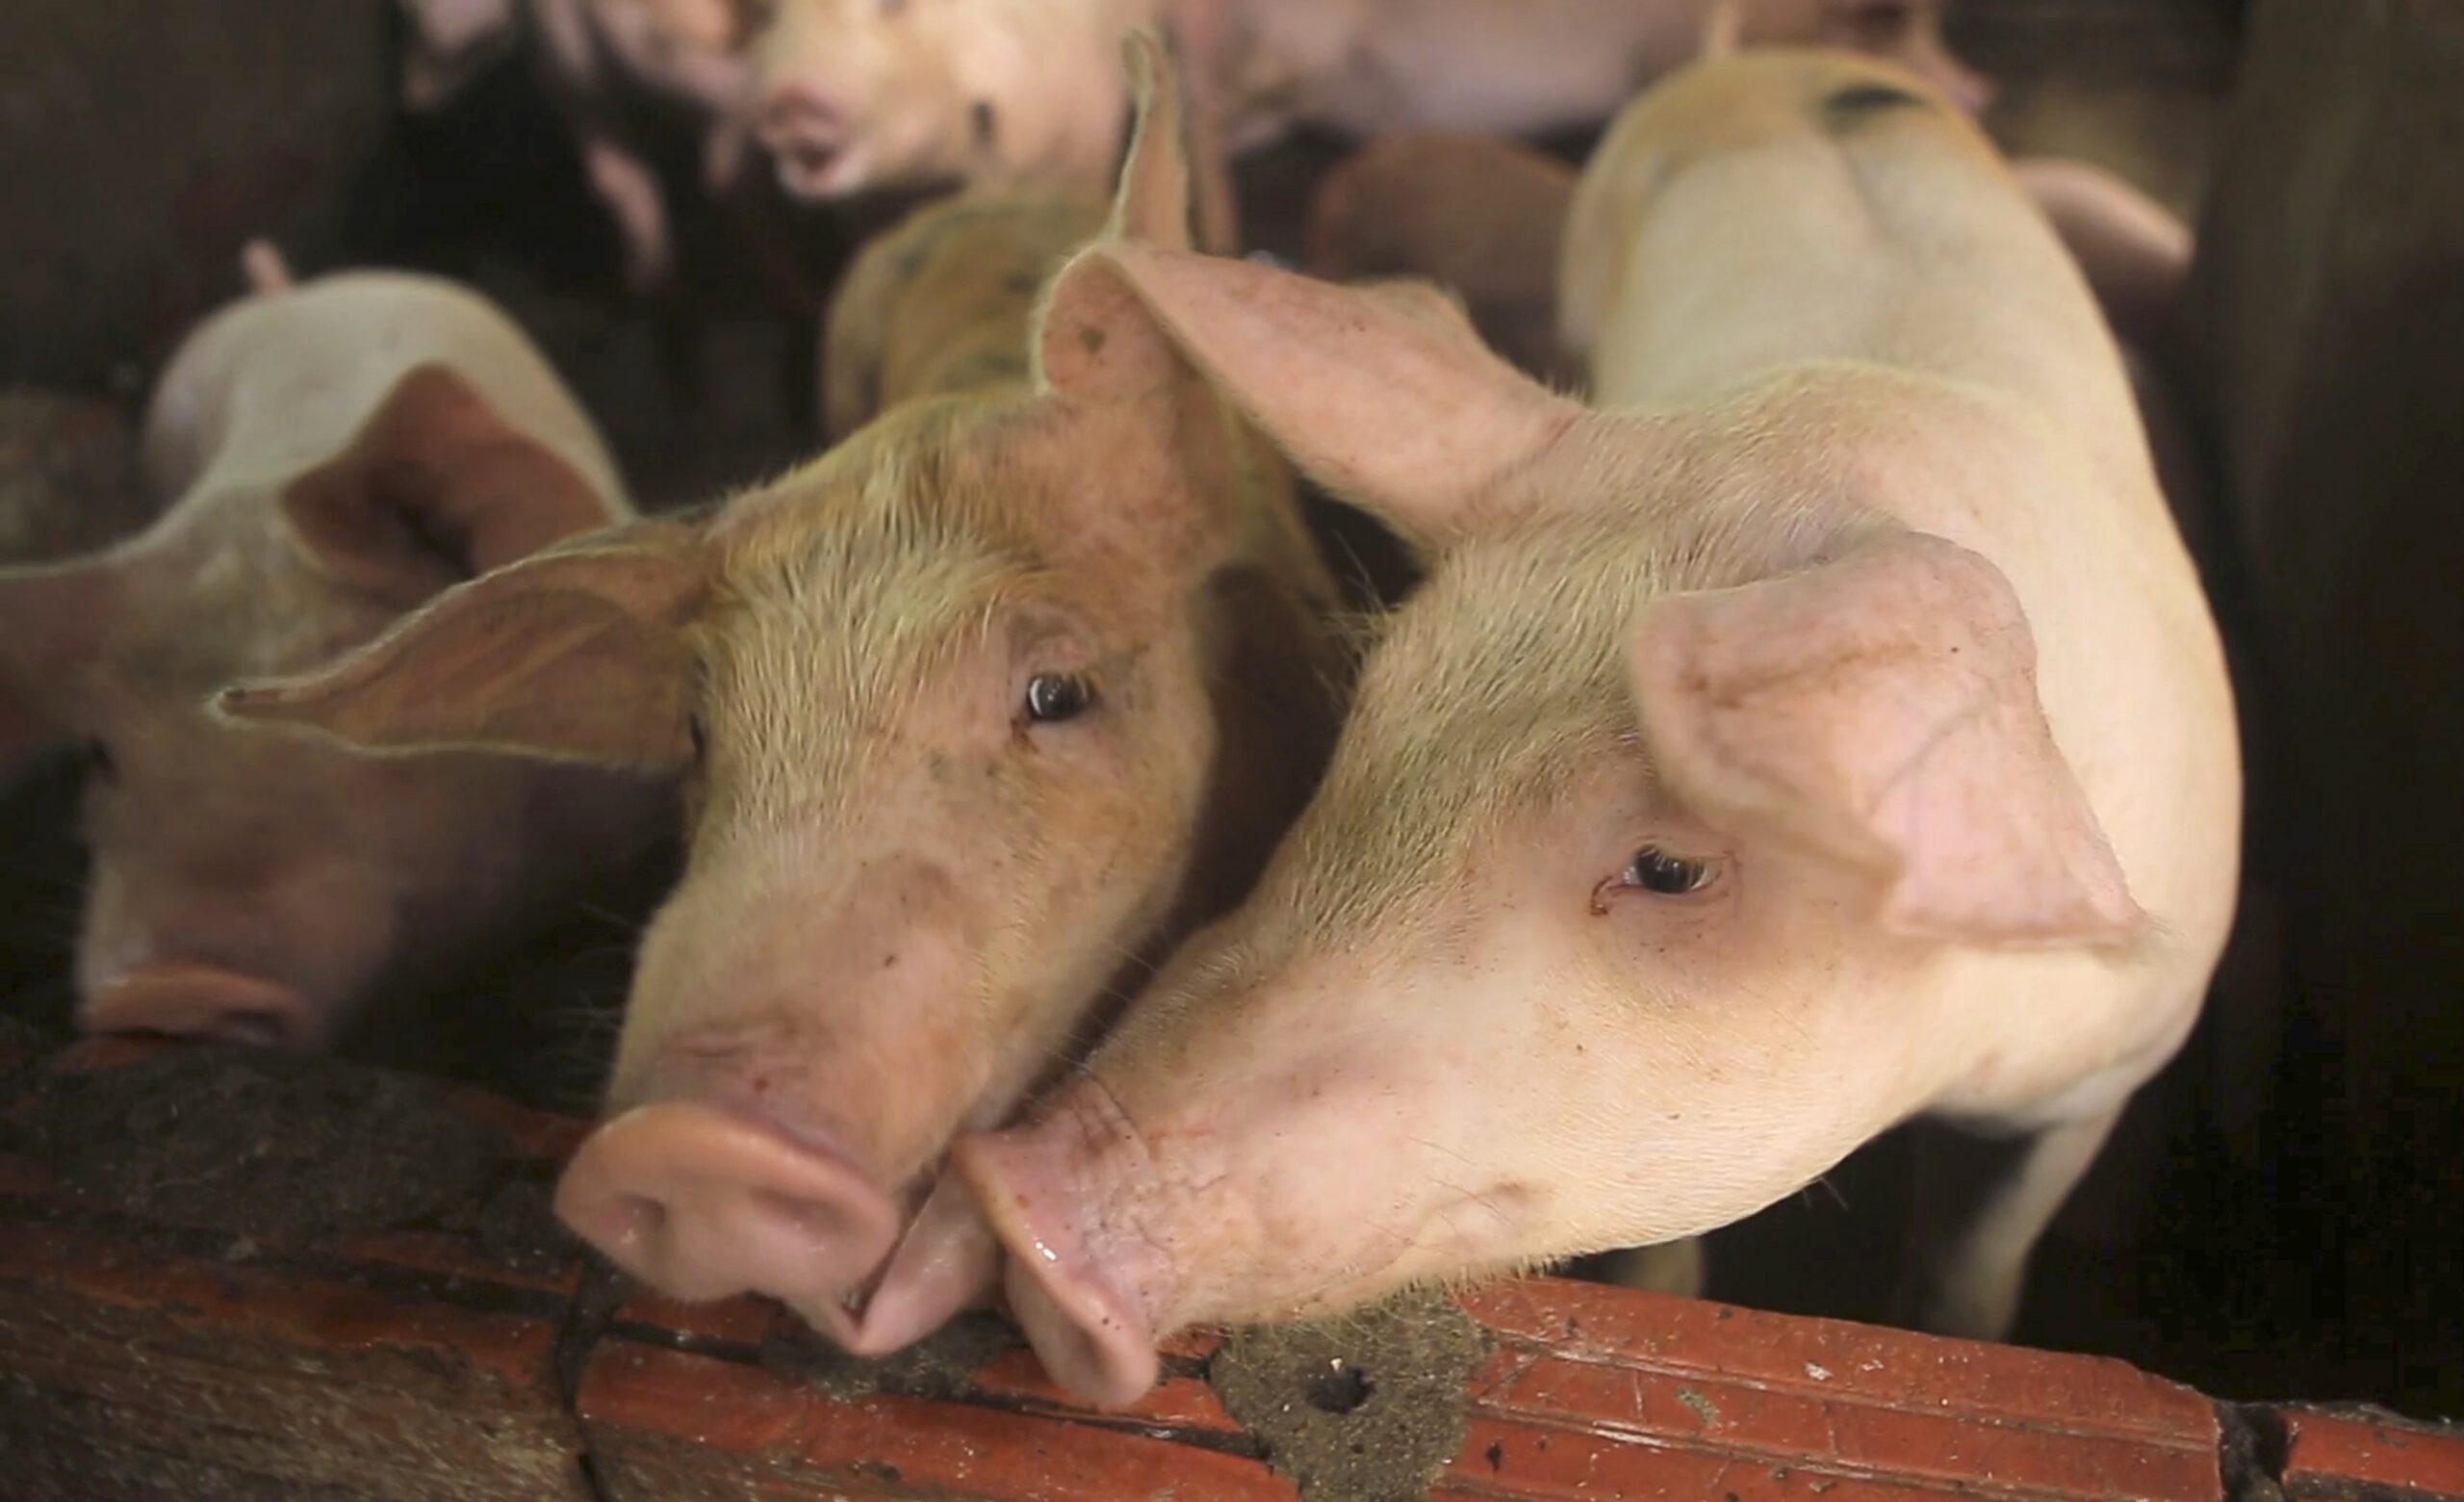 Groups Contend County Could Face Criminal Charges For Attempts To Regulate Large Swine Farms